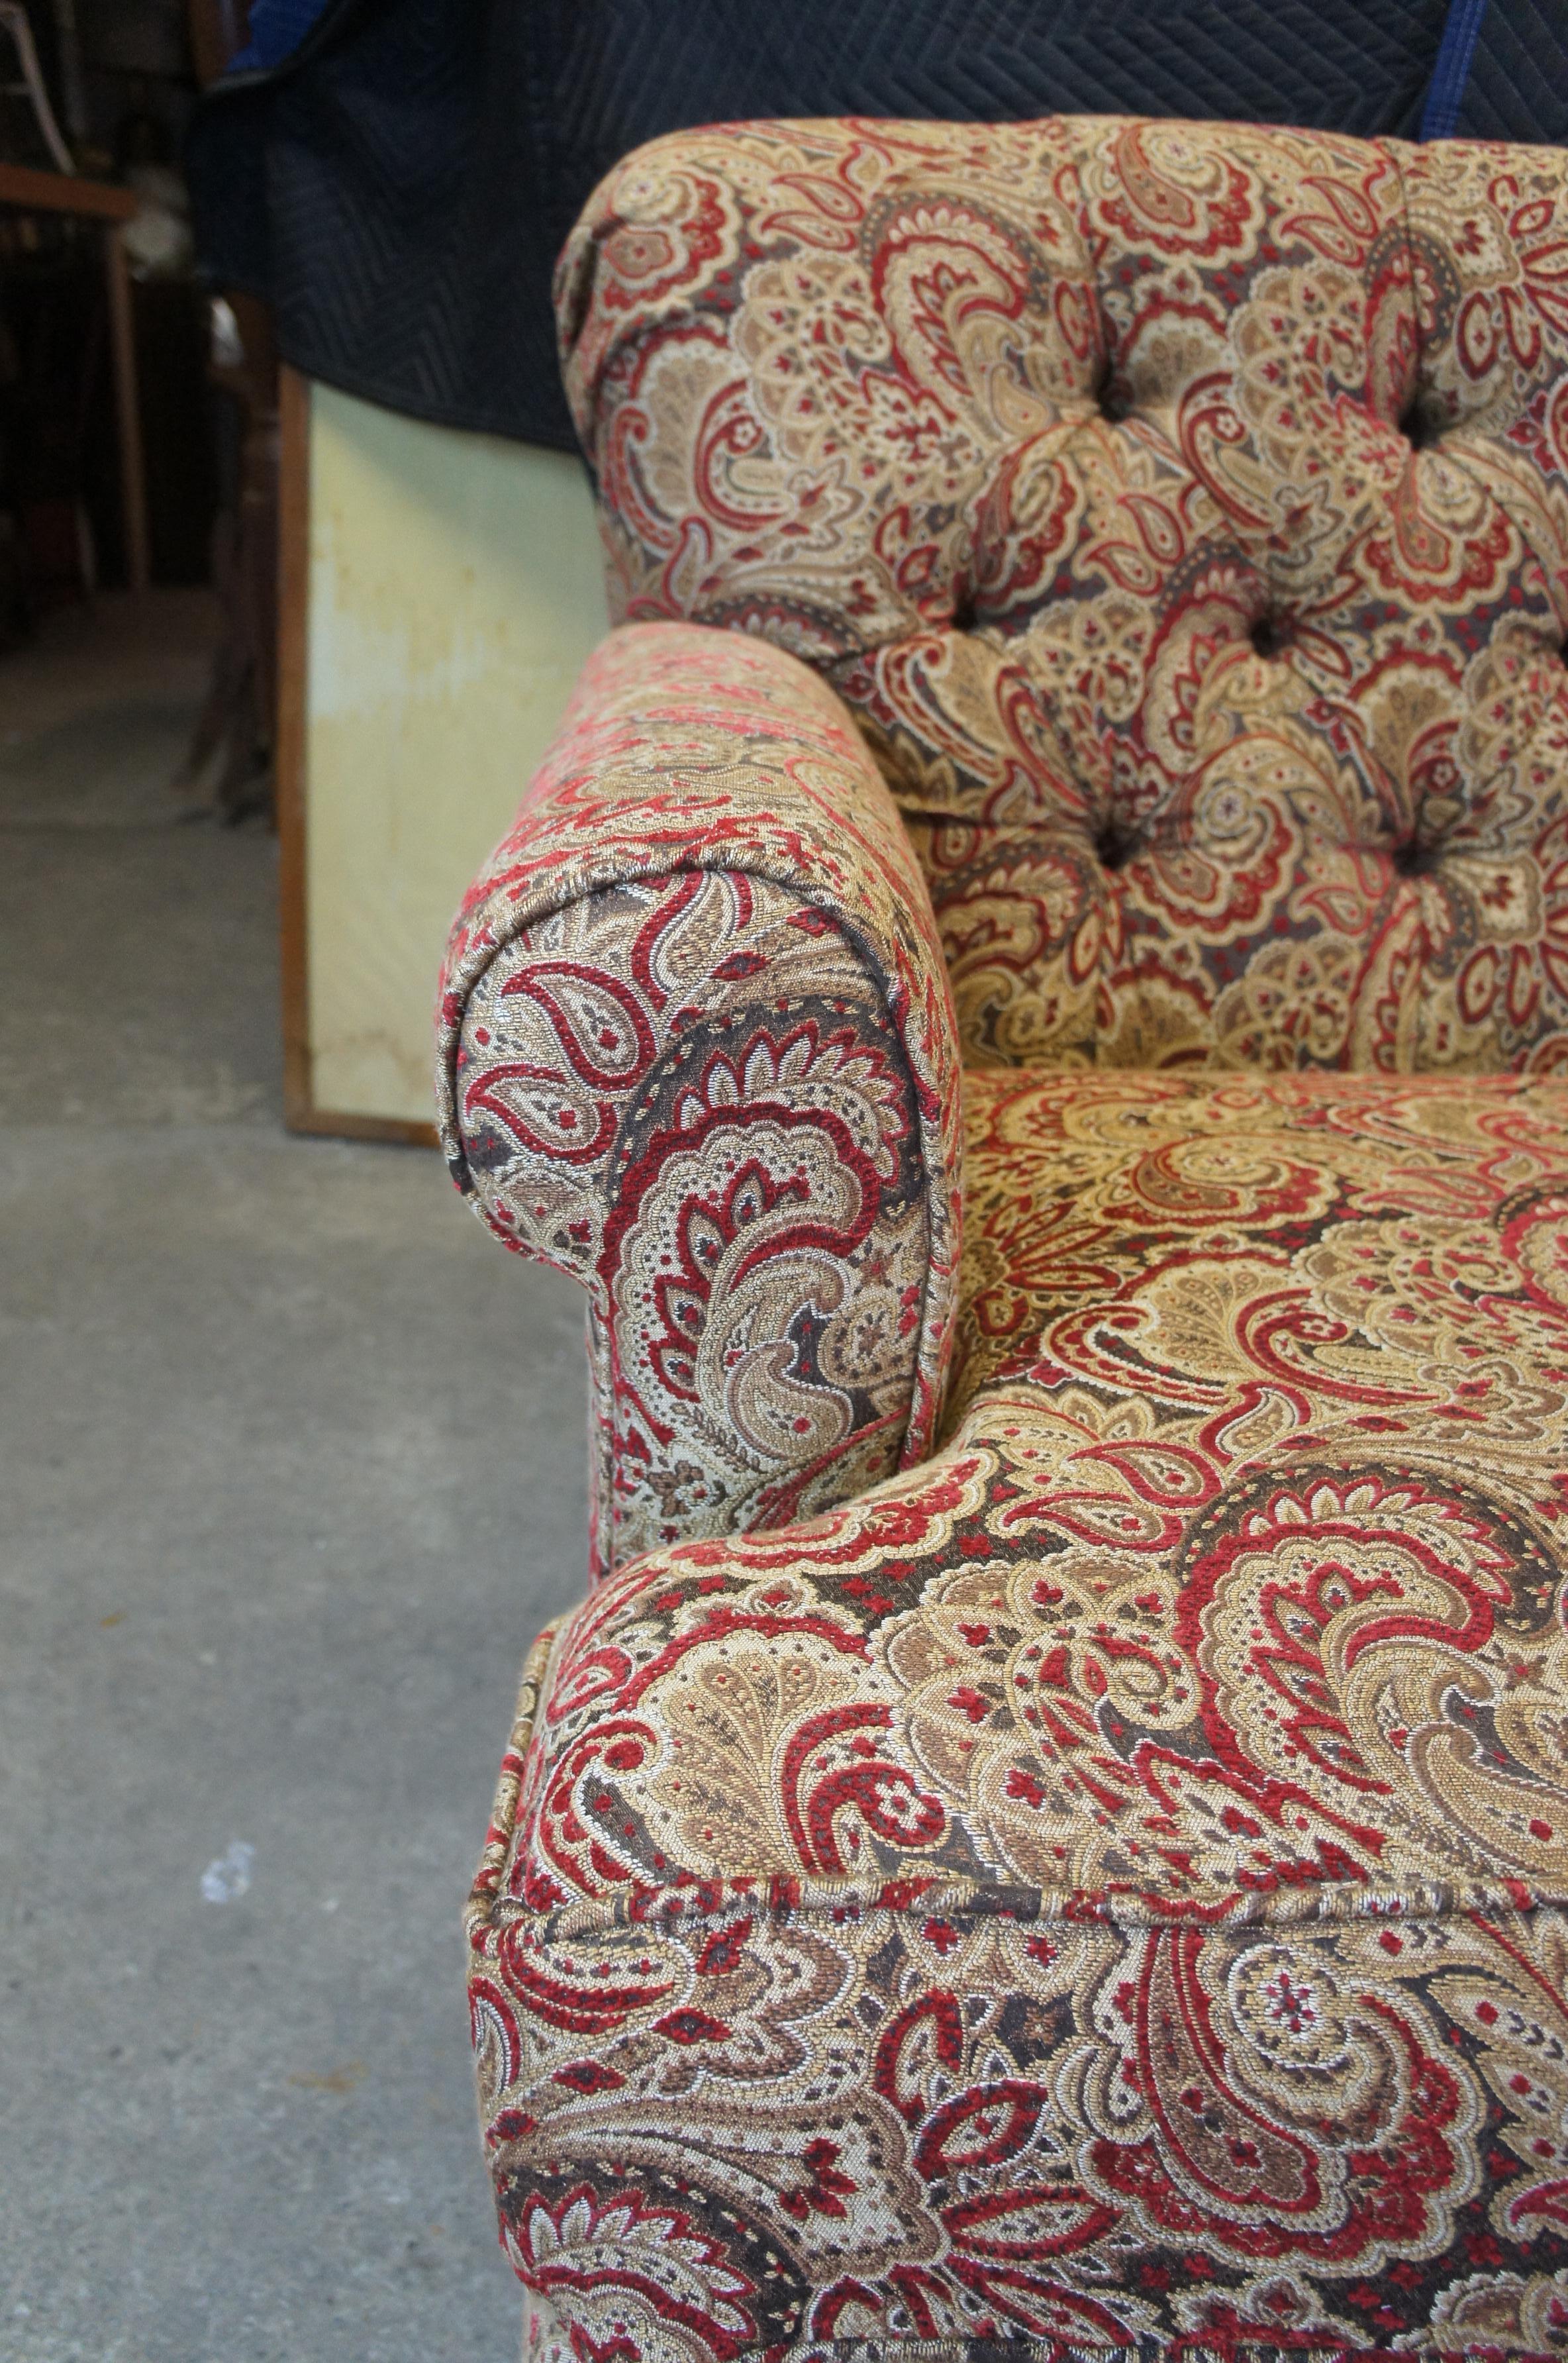 Upholstery Vintage Arhaus Cambridge Collection Tufted Paisley Upholstered Sofa Couch 97 For Sale